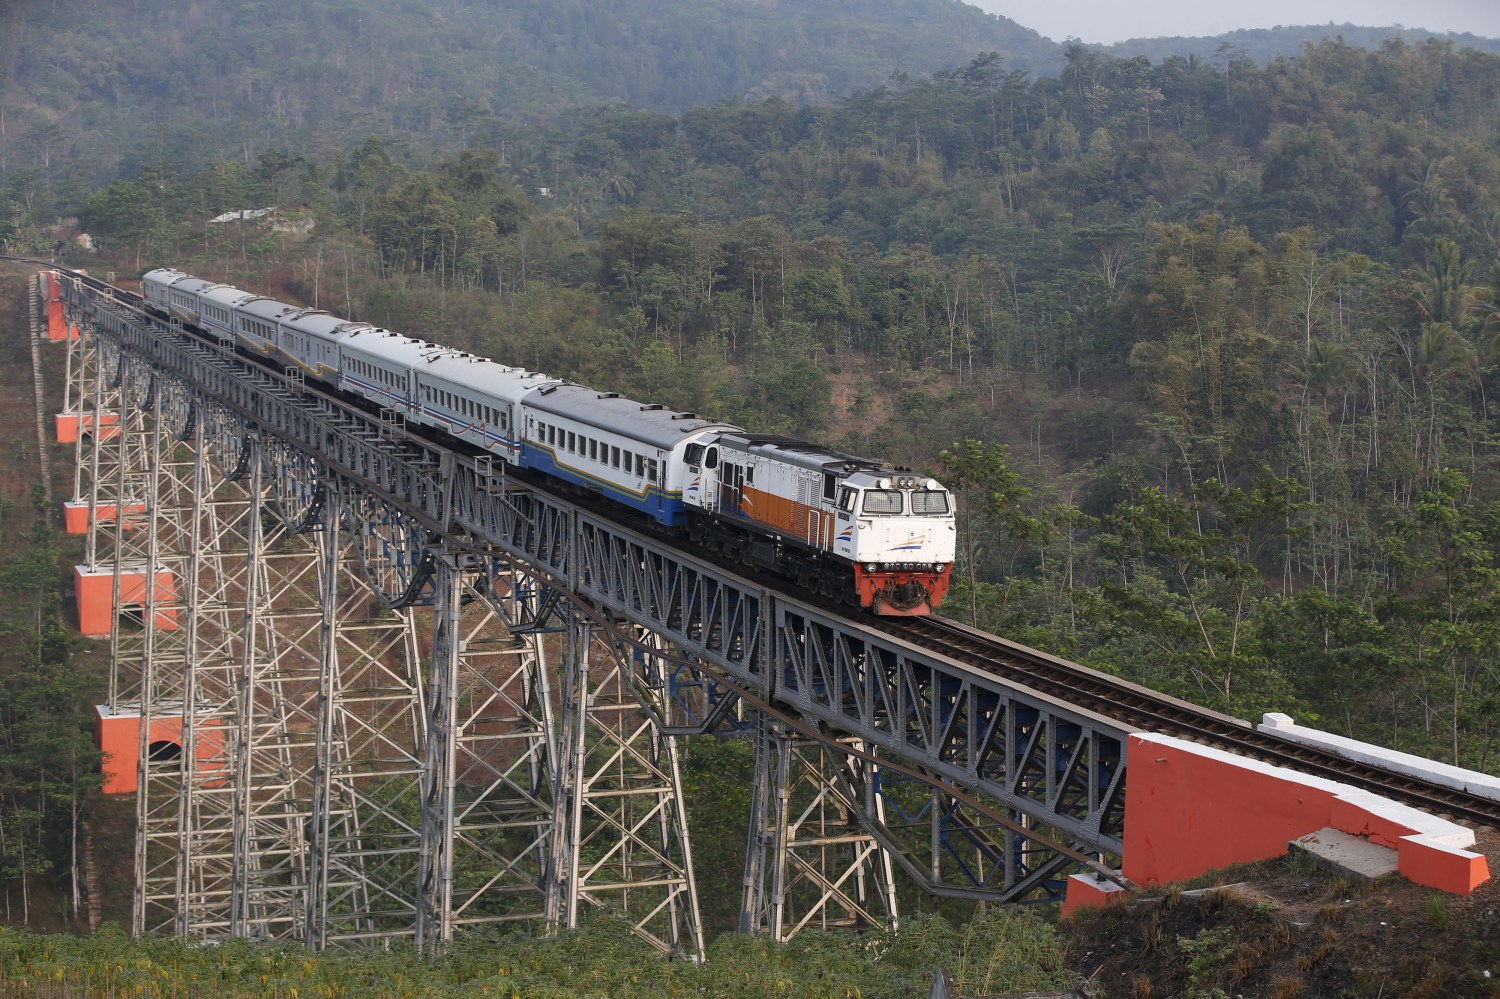 A passenger train crosses the Chikubang bridge as it travels from the city of Bandung to Jakarta near Padalarang, West Java, Indonesia August 25, 2015. Japan's prime minister has sent an envoy to Indonesia to offer a sweeter deal to build a high-speed railway, a Japanese embassy official said on Thursday, highlighting the importance of the multi-billion dollar project that China also wants to win. The two Asian giants are in a neck-and-neck contest to win a contract to build Indonesia's first high-speed rail, between the capital Jakarta and textile hub Bandung, a project that would bolster their influence in Southeast Asia's biggest economy.Picture taken August 25, 2015. REUTERS/Darren Whiteside